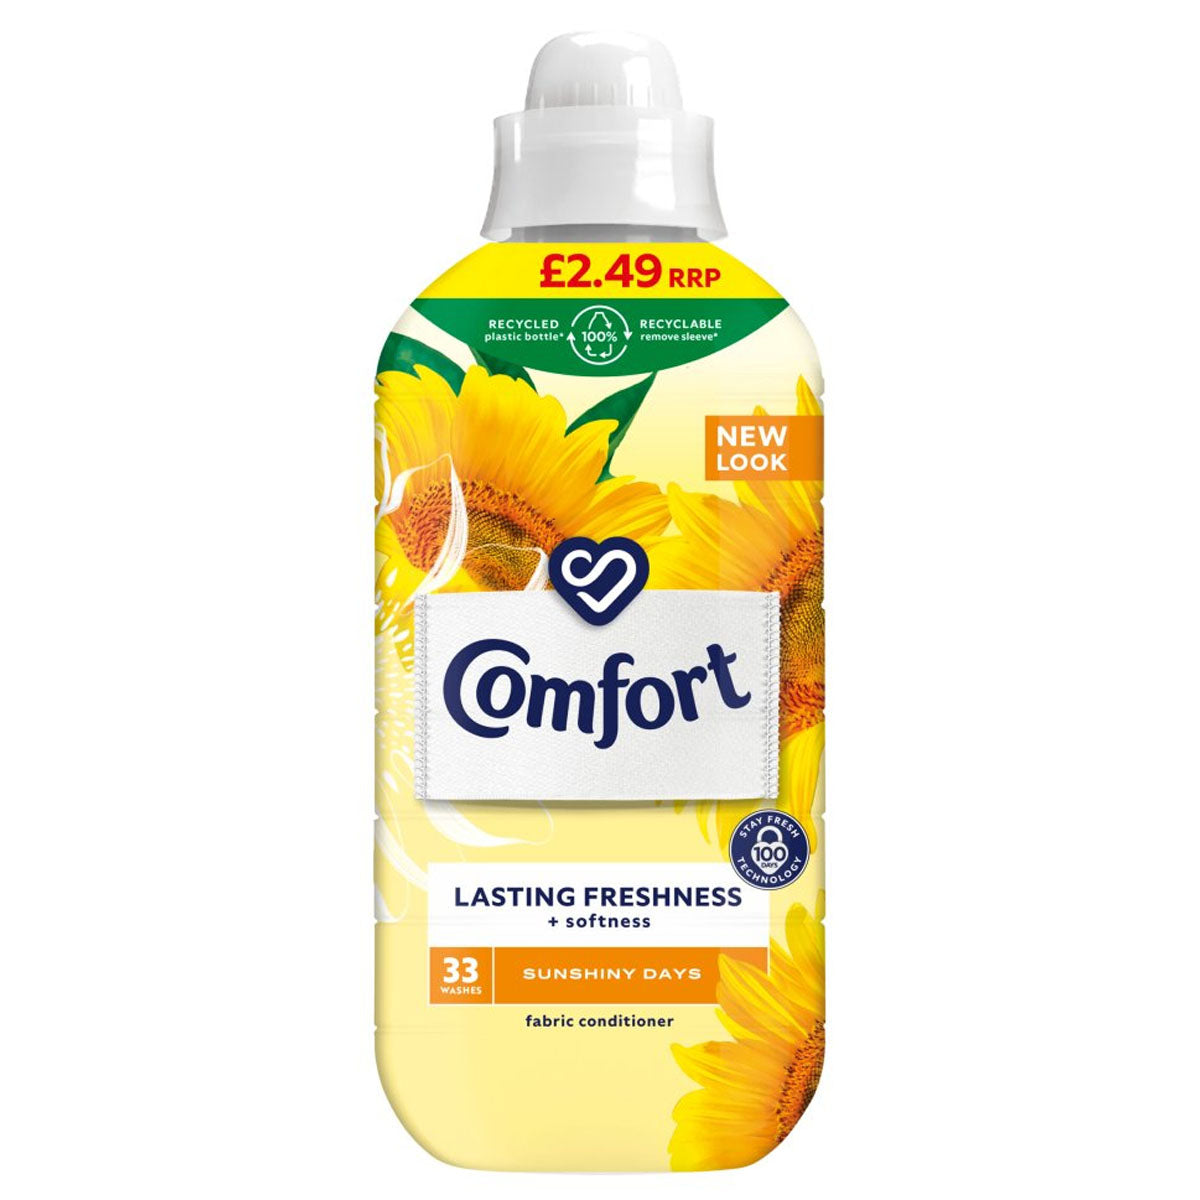 Comfort - Fabric Conditioner Sunshiny Days - 33 washes 990ml - Continental Food Store